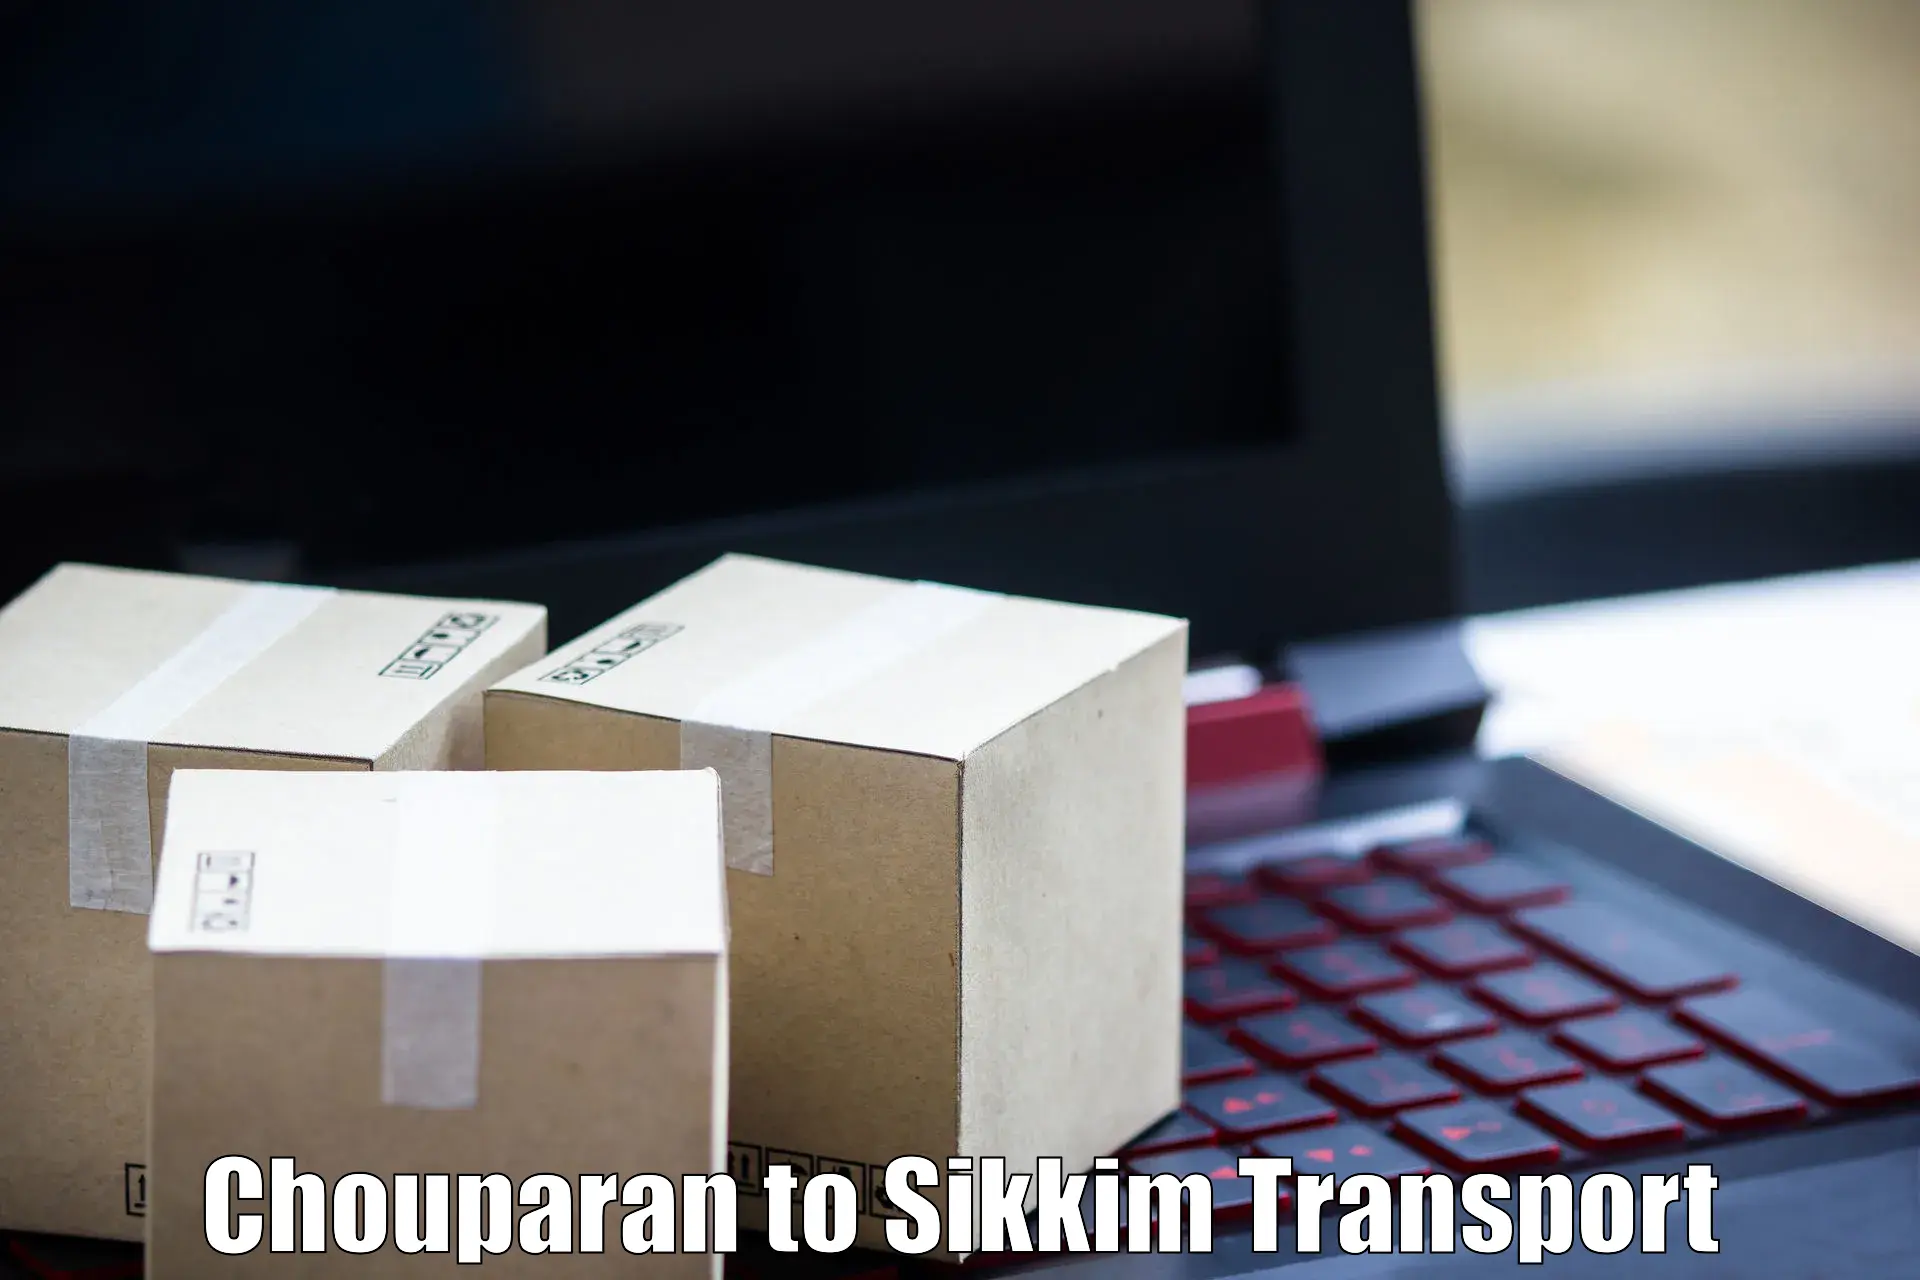 Online transport service Chouparan to East Sikkim